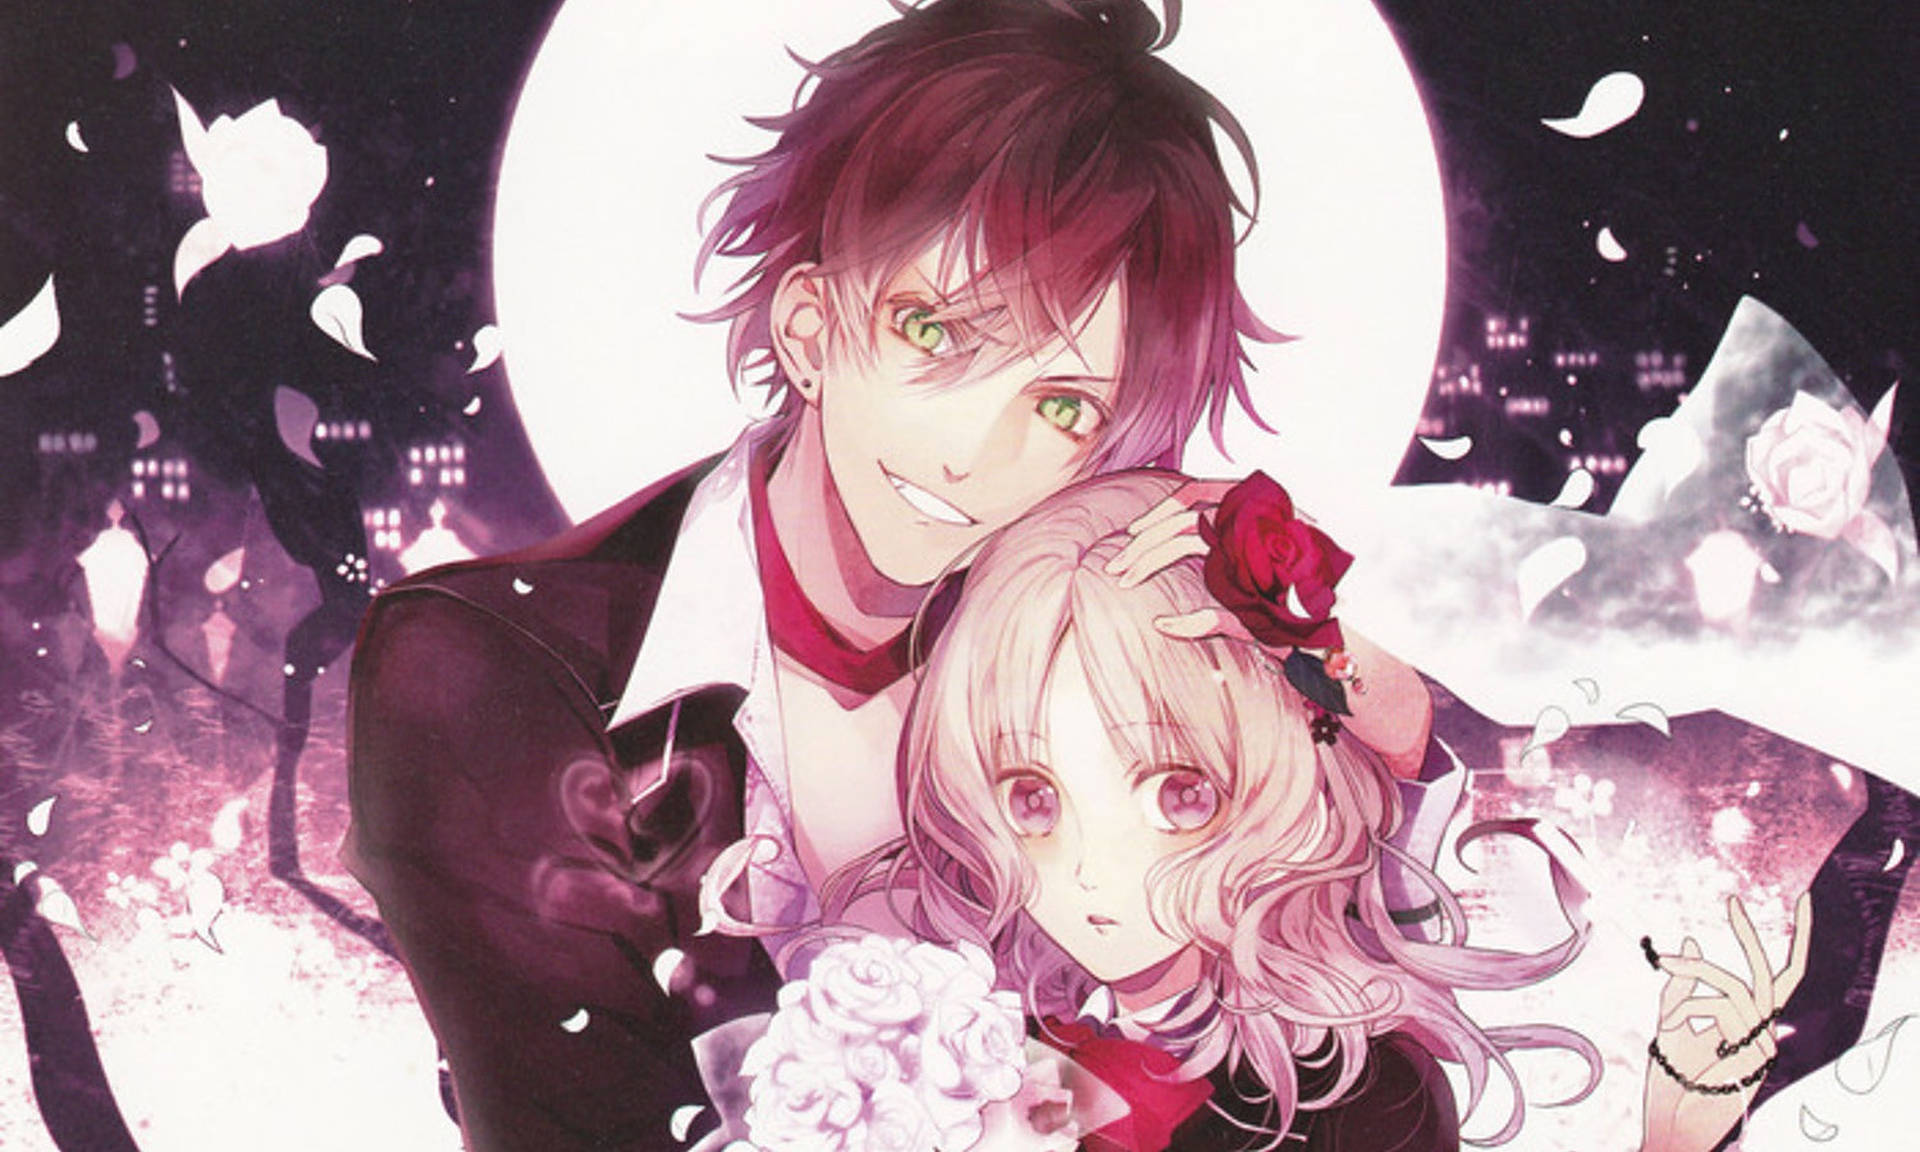 Caption: Intense Moments With Ayato And Yui - Diabolik Lovers Wallpaper Background